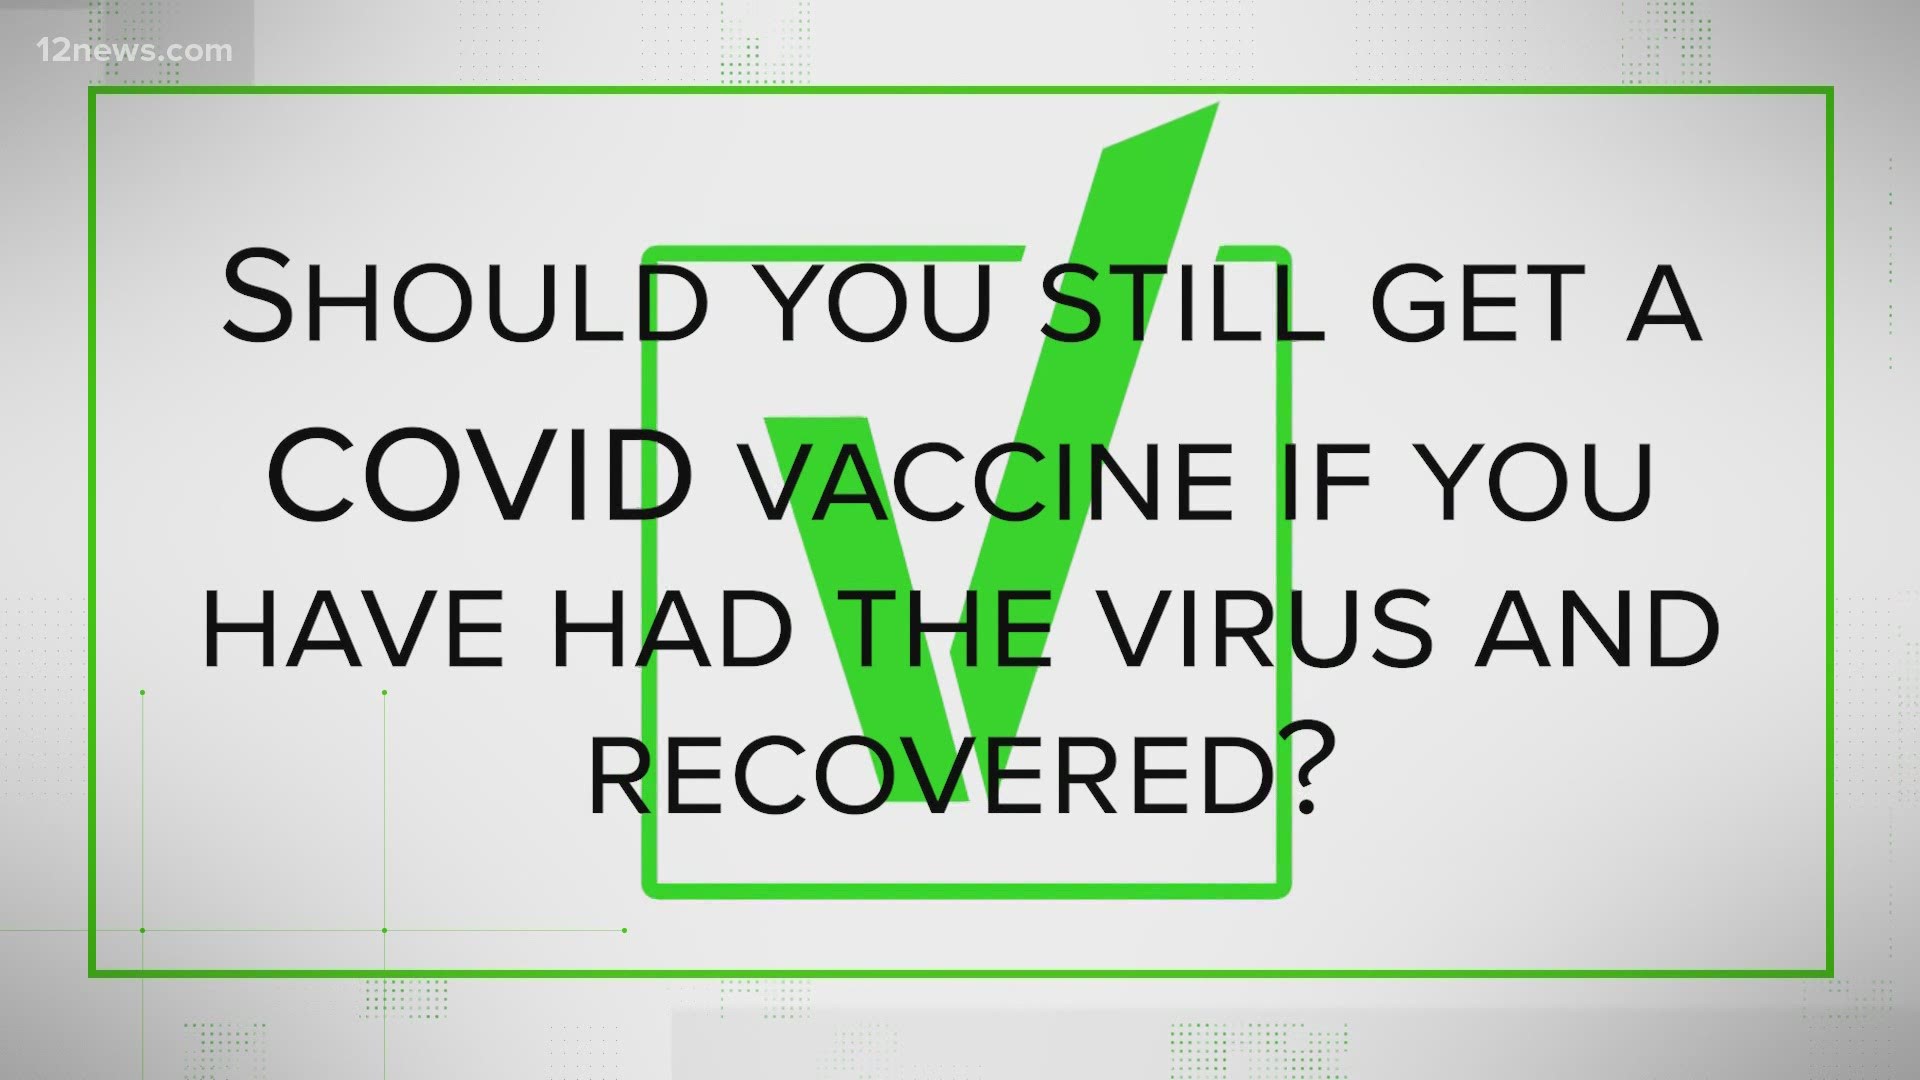 27 million people in the U.S. have had COVID-19. Do those people still need to get a vaccine? The Verify Team looks into it.